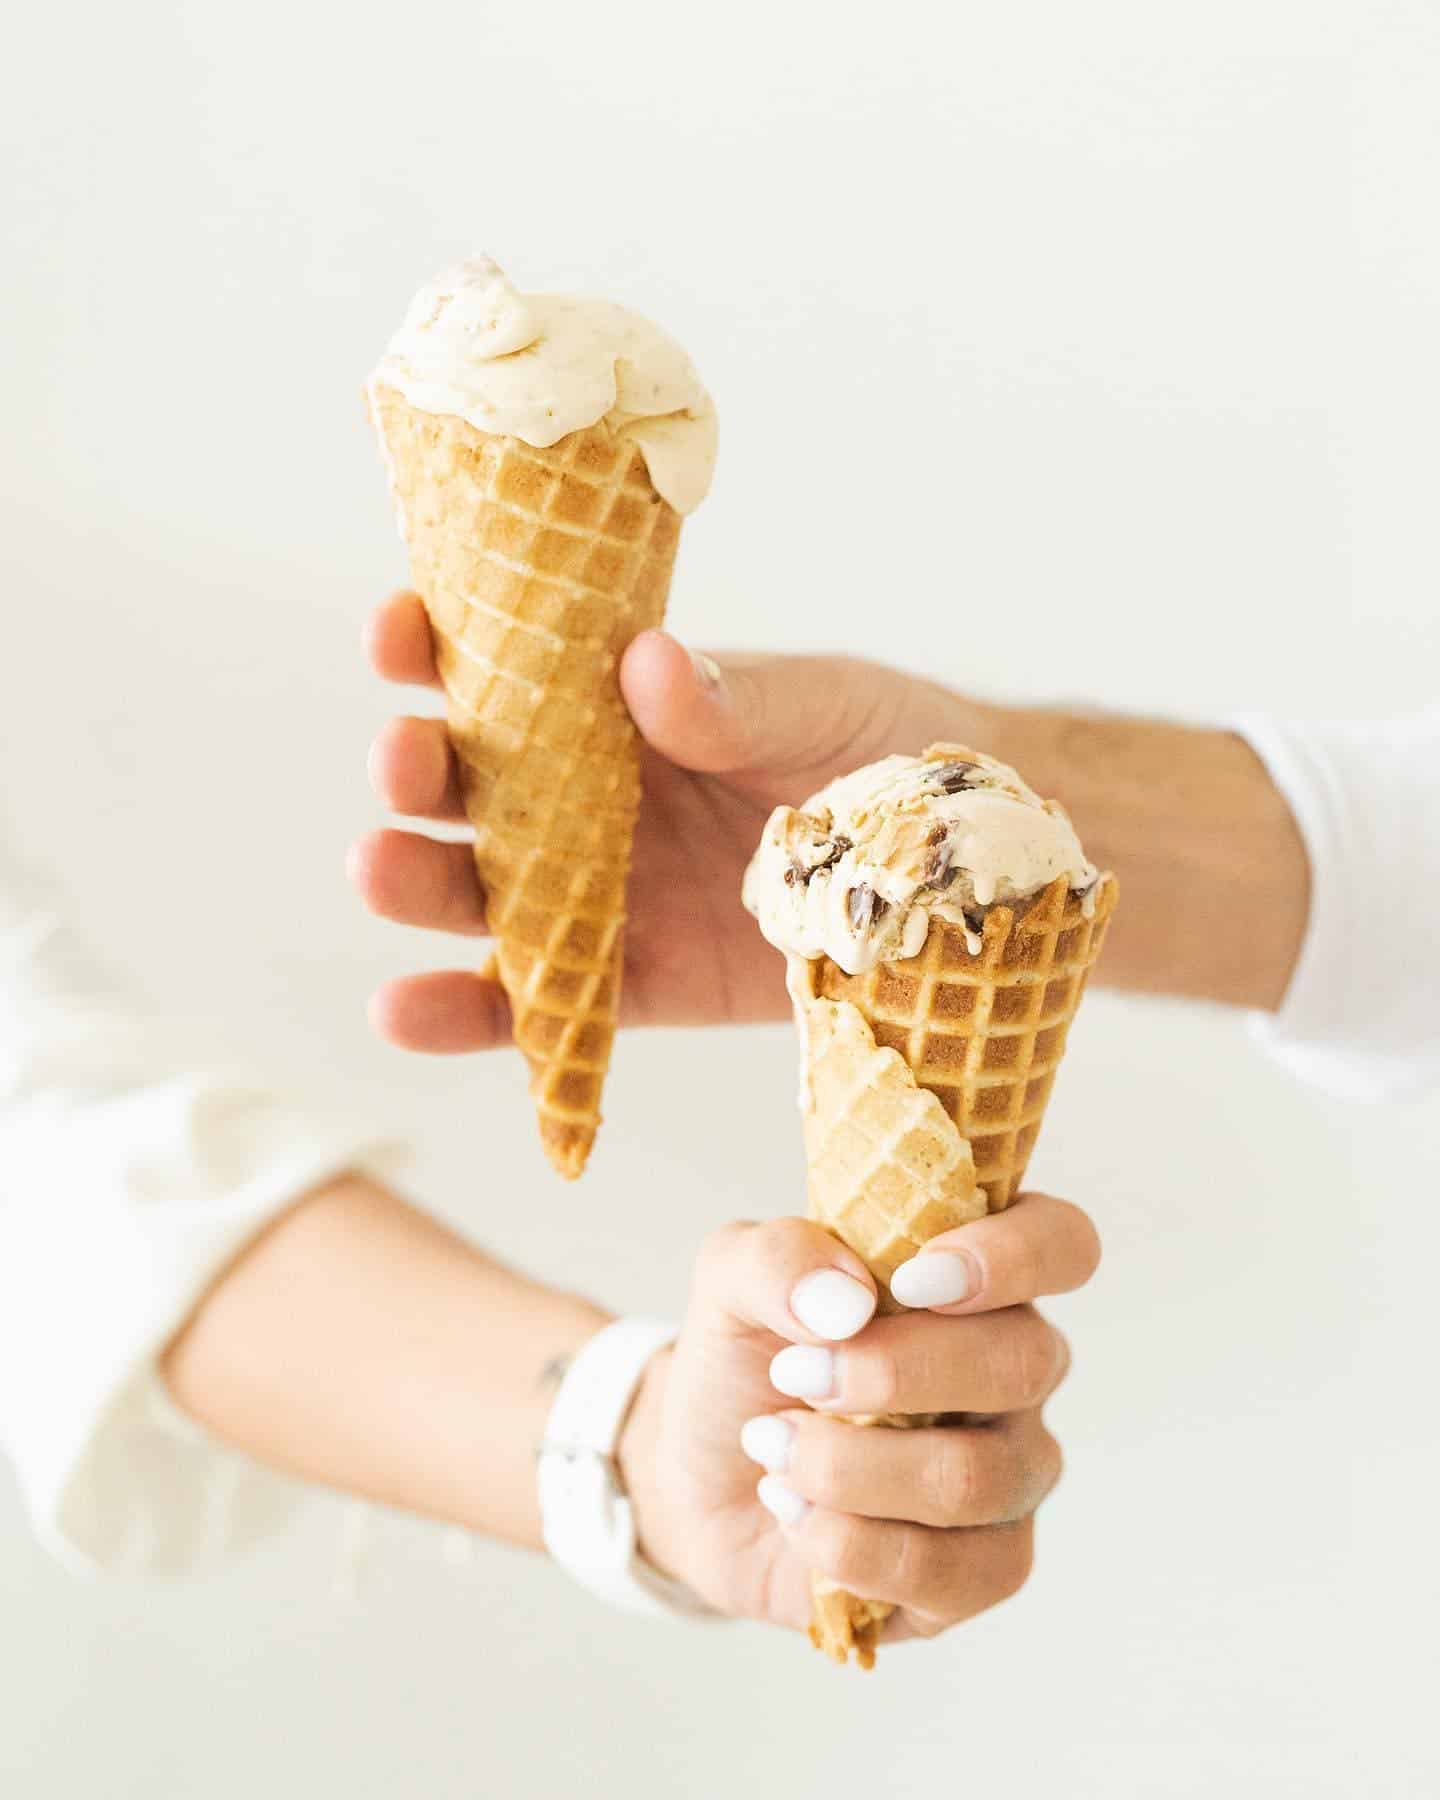 Did you hear the scoop?Yuliya’s Ice Cream is coming to Metropolitan in 2023!

Yuliya’s Ice Cream will offer handcrafted dairy and vegan ice cream made with all natural, organic, and locally sourced ingredients. To ensure nothing artificial gets added into the ice cream, they make everything from scratch, including the ice cream base, all of the mix-ins, and gluten free waffle cones. 

Owner, Yuliya Shvinhelskaya, immigrated to the United States in 2015. Alongside popular flavors like Peanut Butter Bars, Butter Almond Crunch and Strawberry Cheesecake - Yuliya will introduce Slavic-inspired flavors in honor of her belarusian roots. Swipe over and cone-gratulate Yuliya on her very first Ice Cream shop! 

🏻 Opening 2023
🏻 @yuliyasicecream